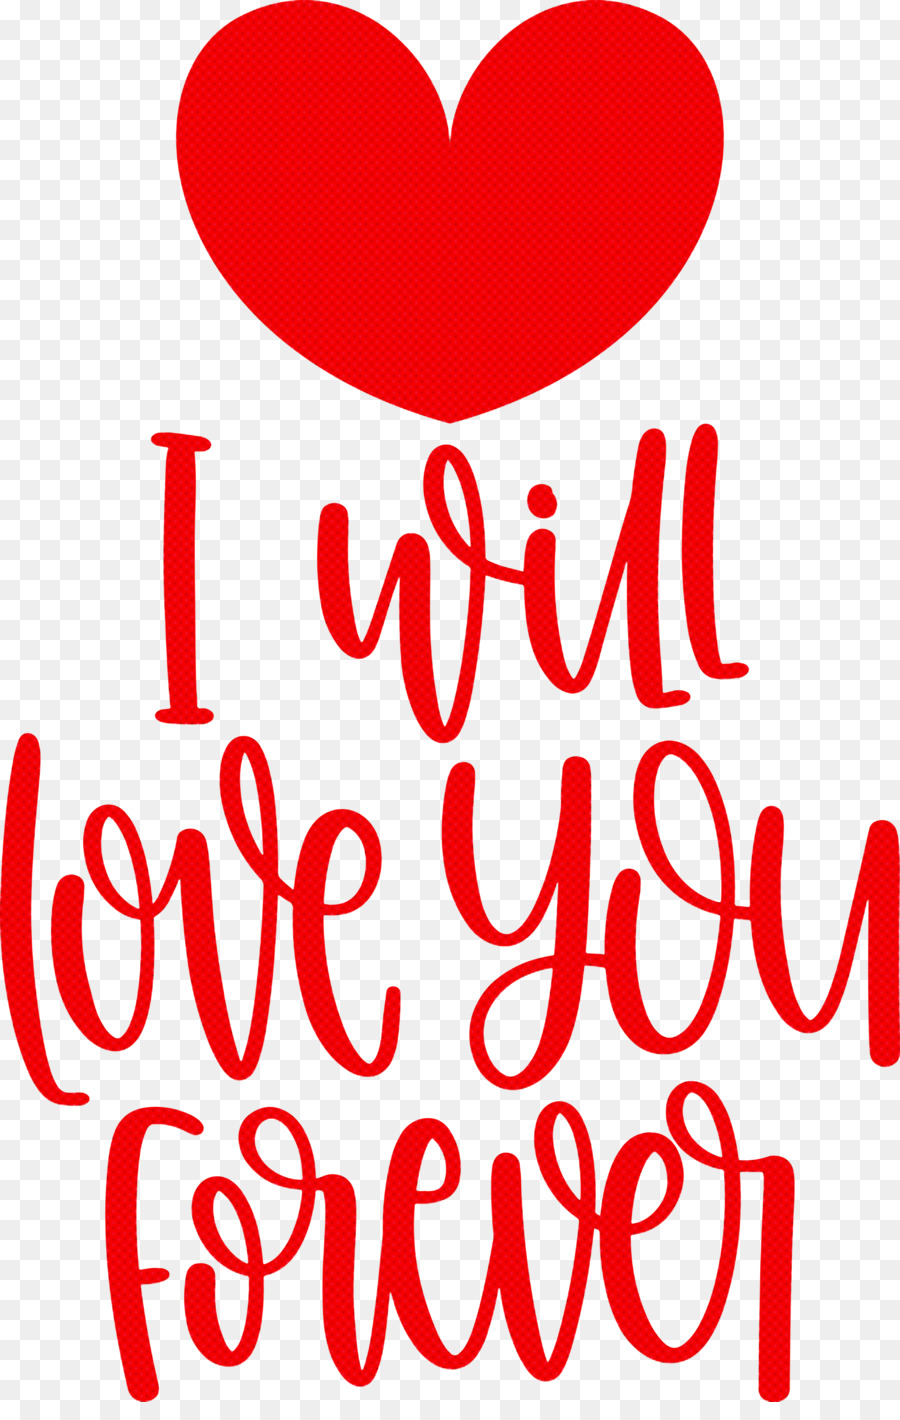 Love You Forever valentines day valentines day quote